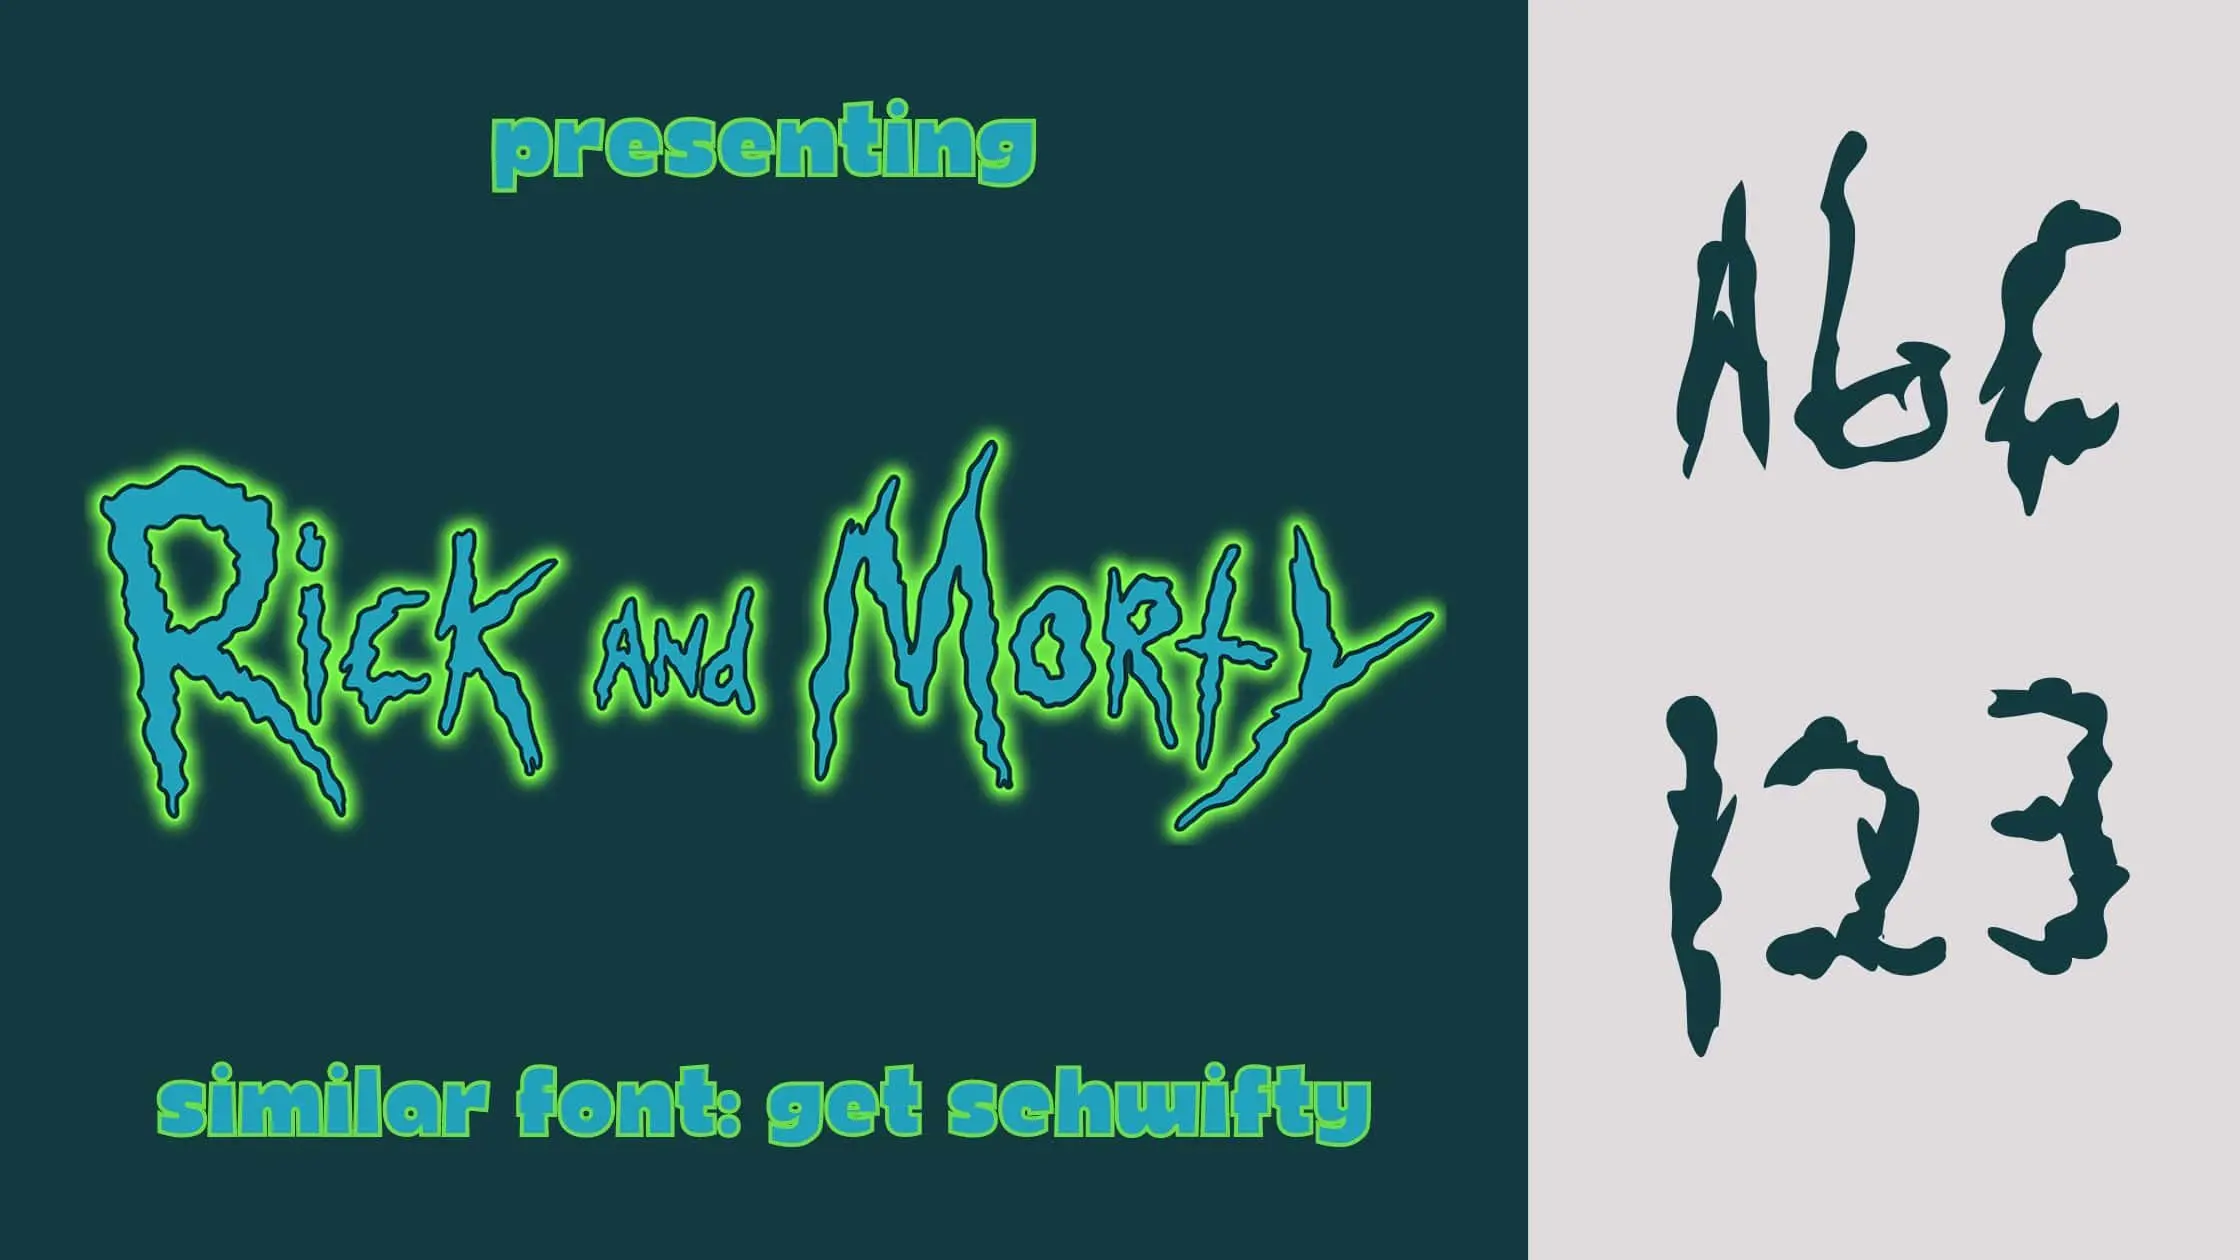 Rick and Morty Font